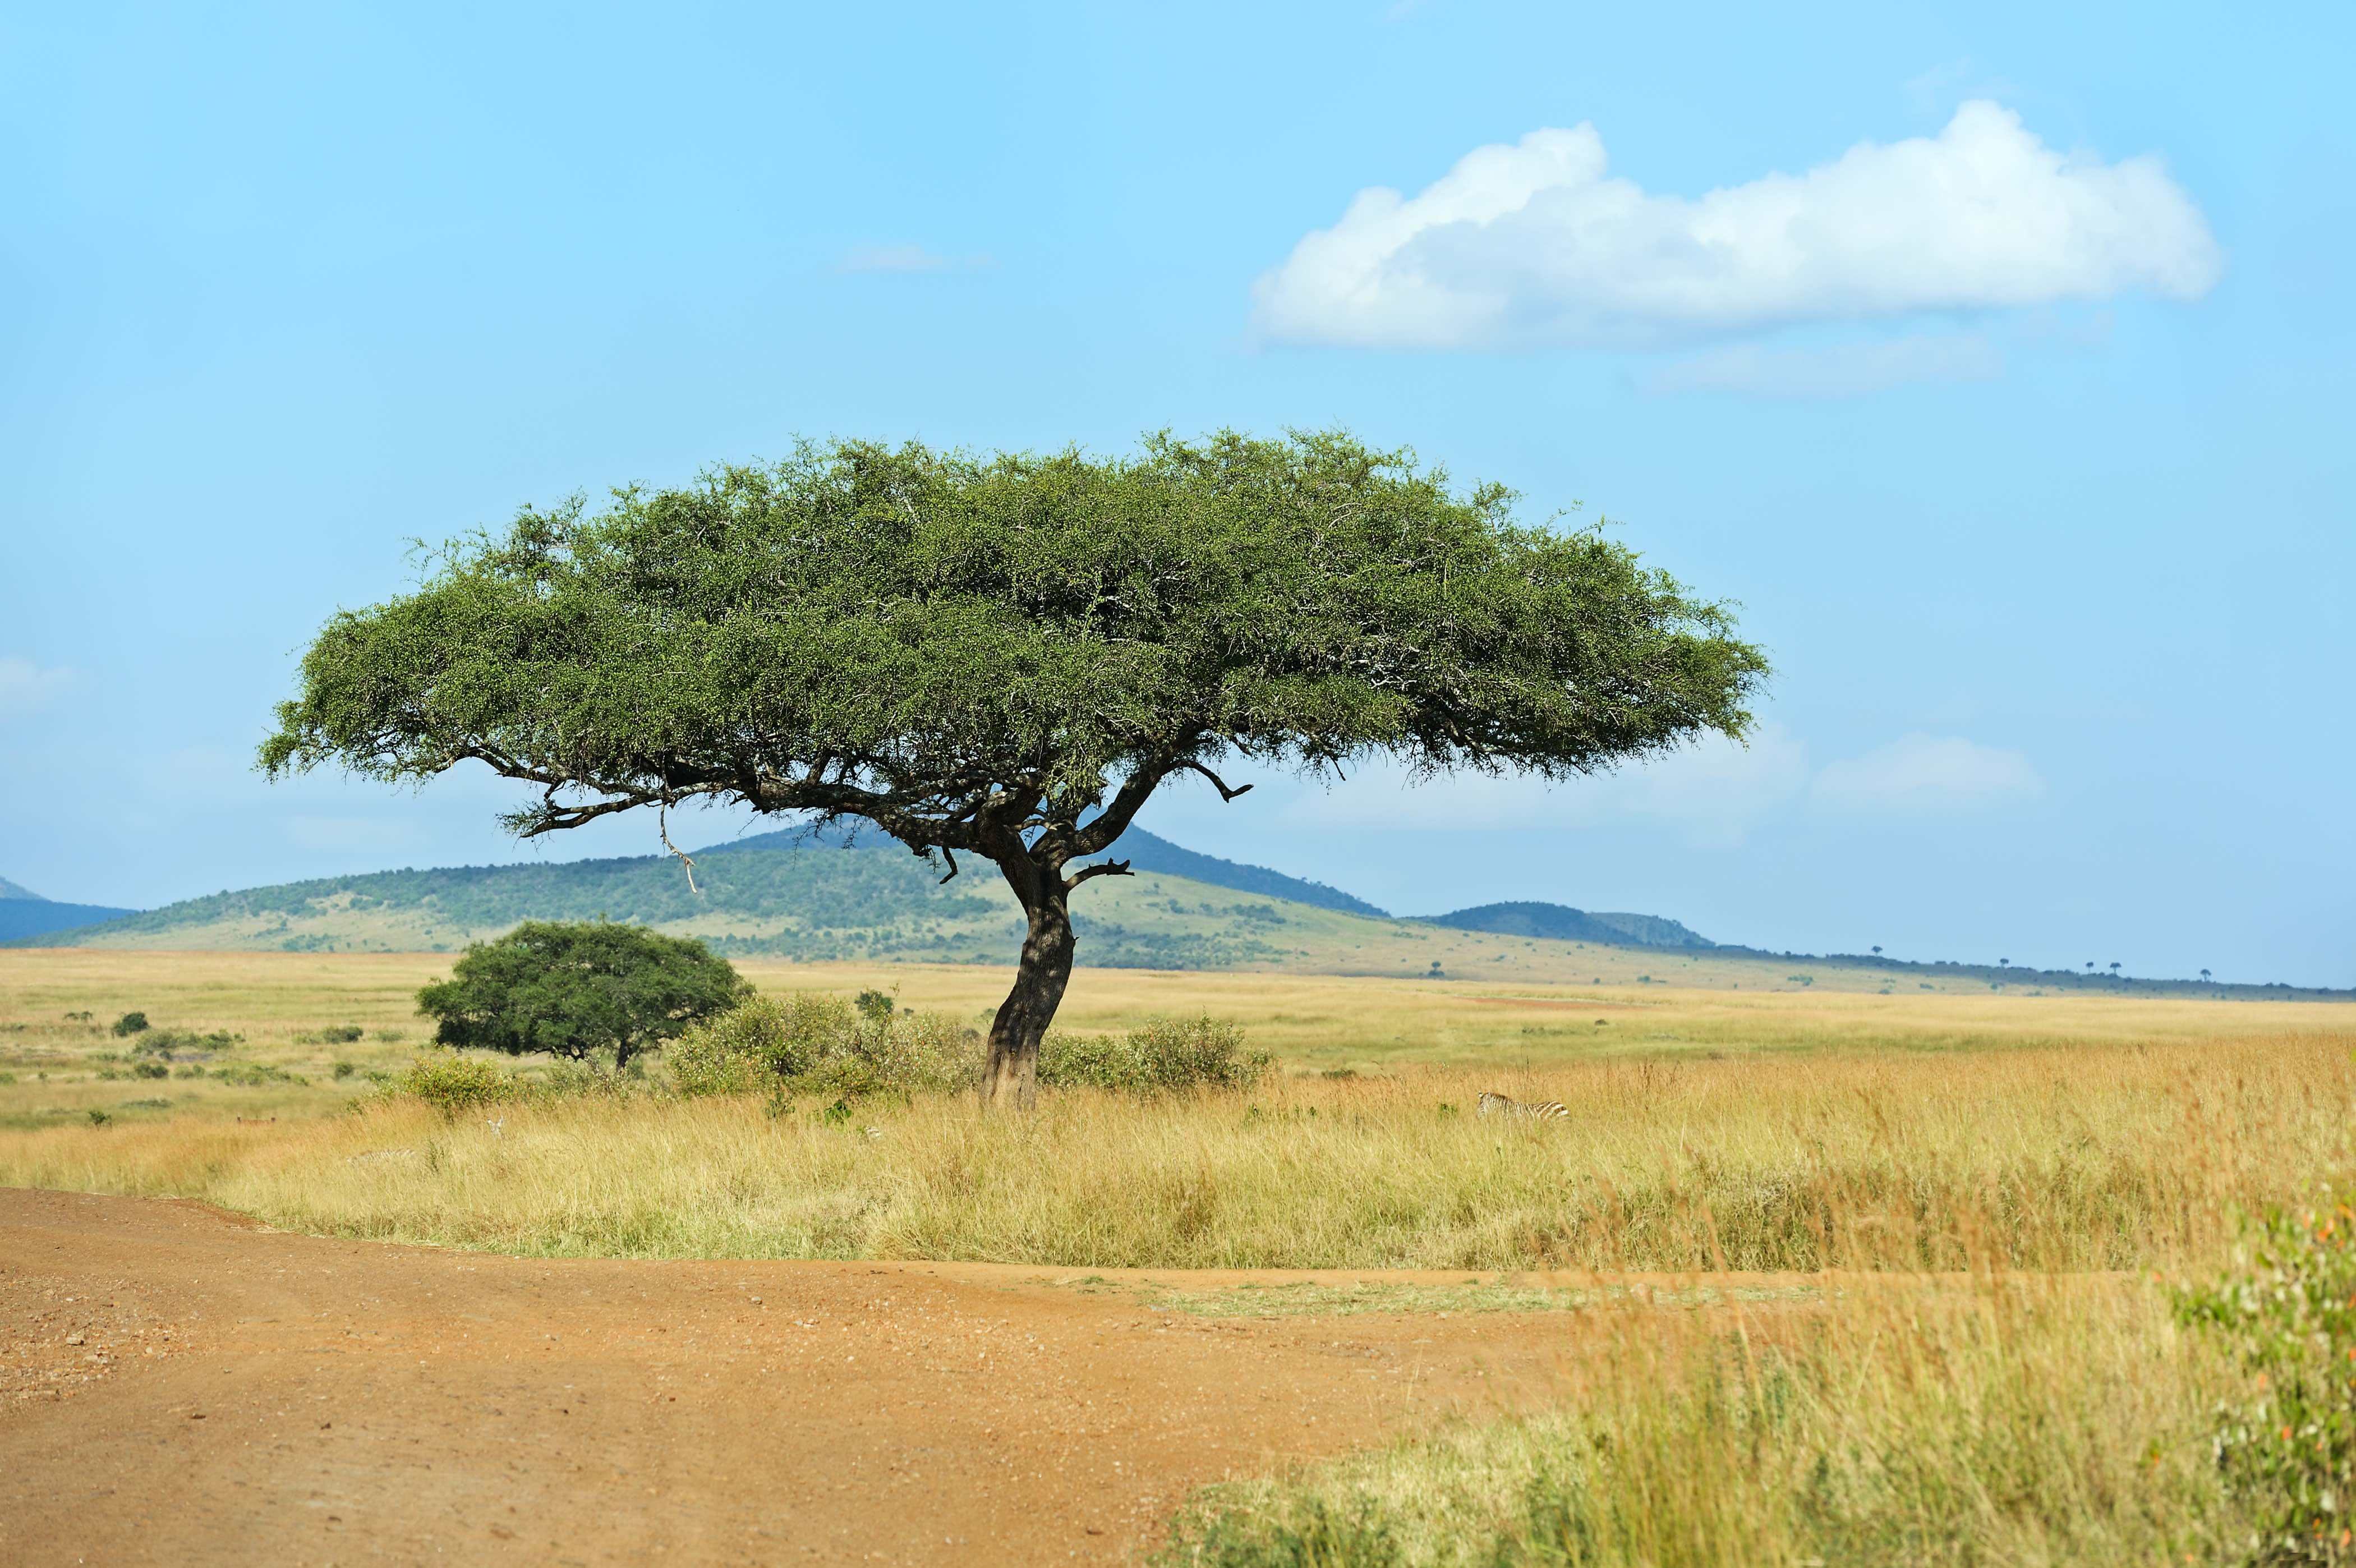 A tree grows in the African savanna.